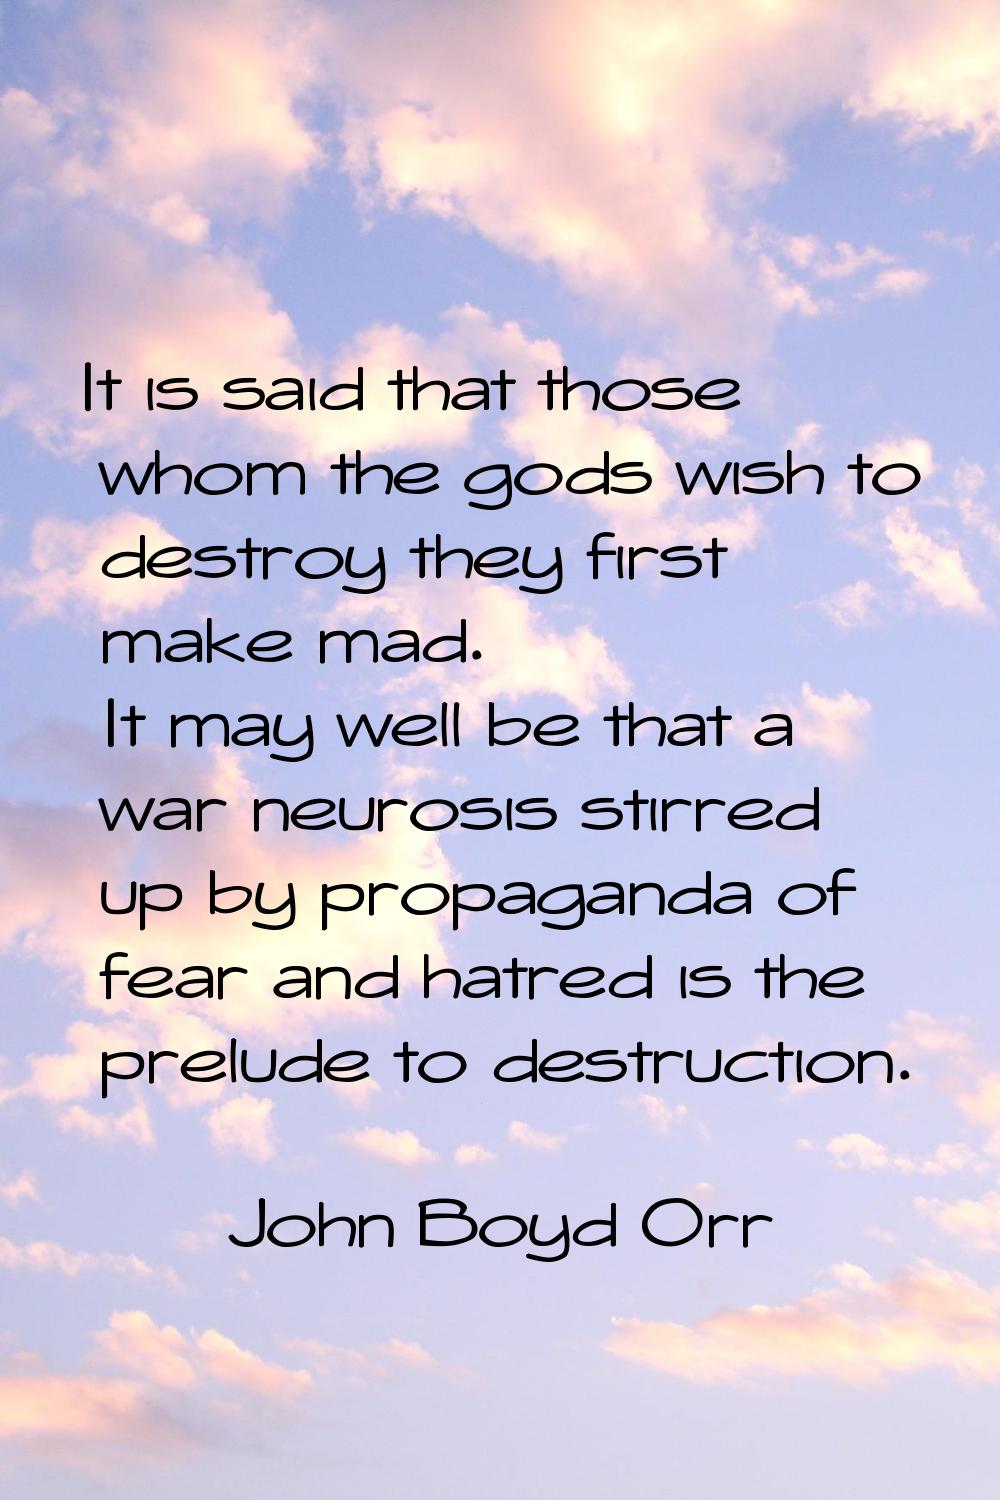 It is said that those whom the gods wish to destroy they first make mad. It may well be that a war 